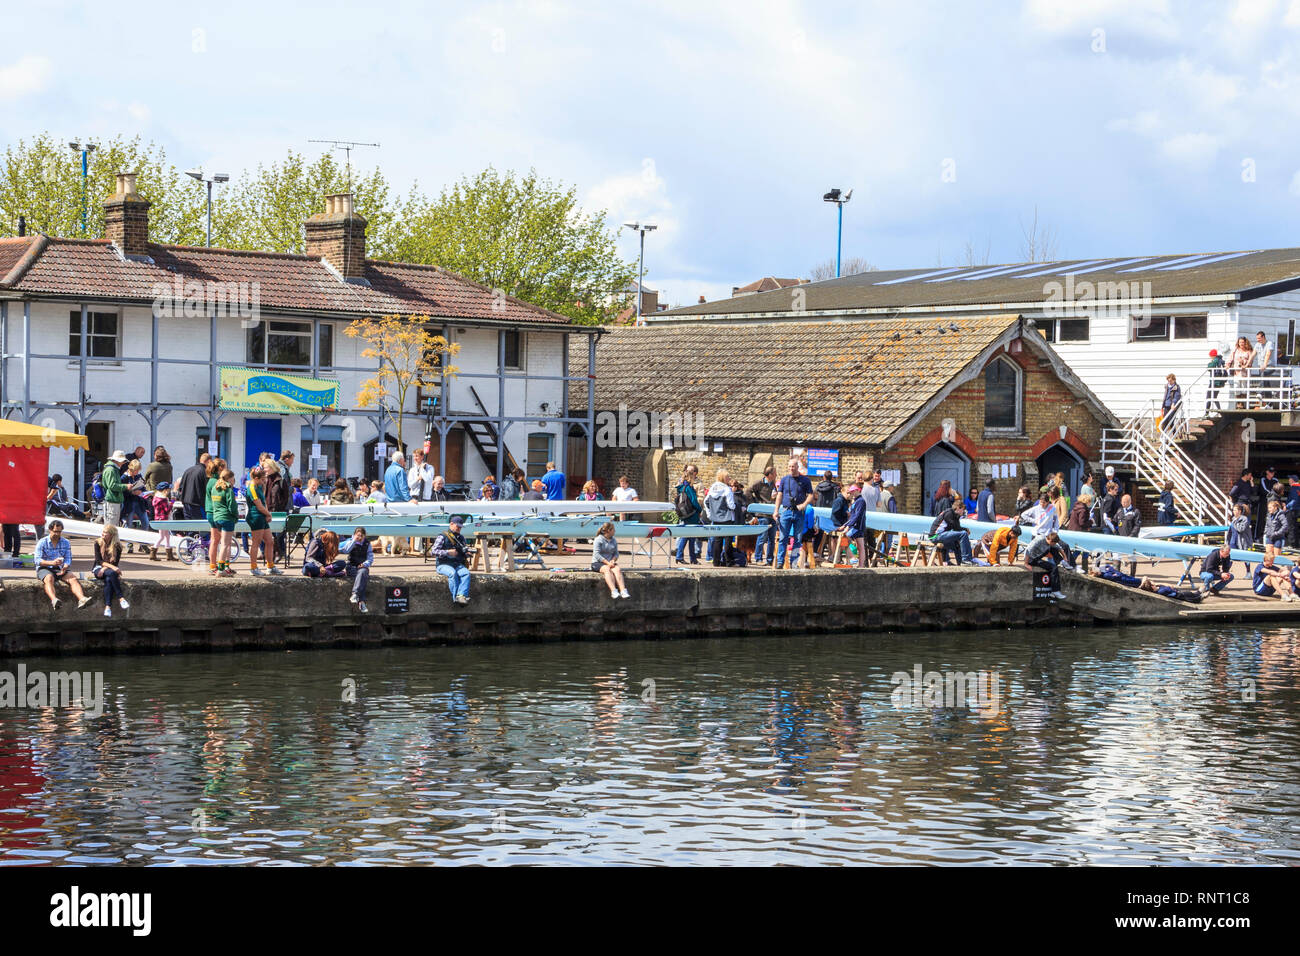 A sporting event at Lea Rowing Club on the River Lea, Upper Clapton, London, UK Stock Photo